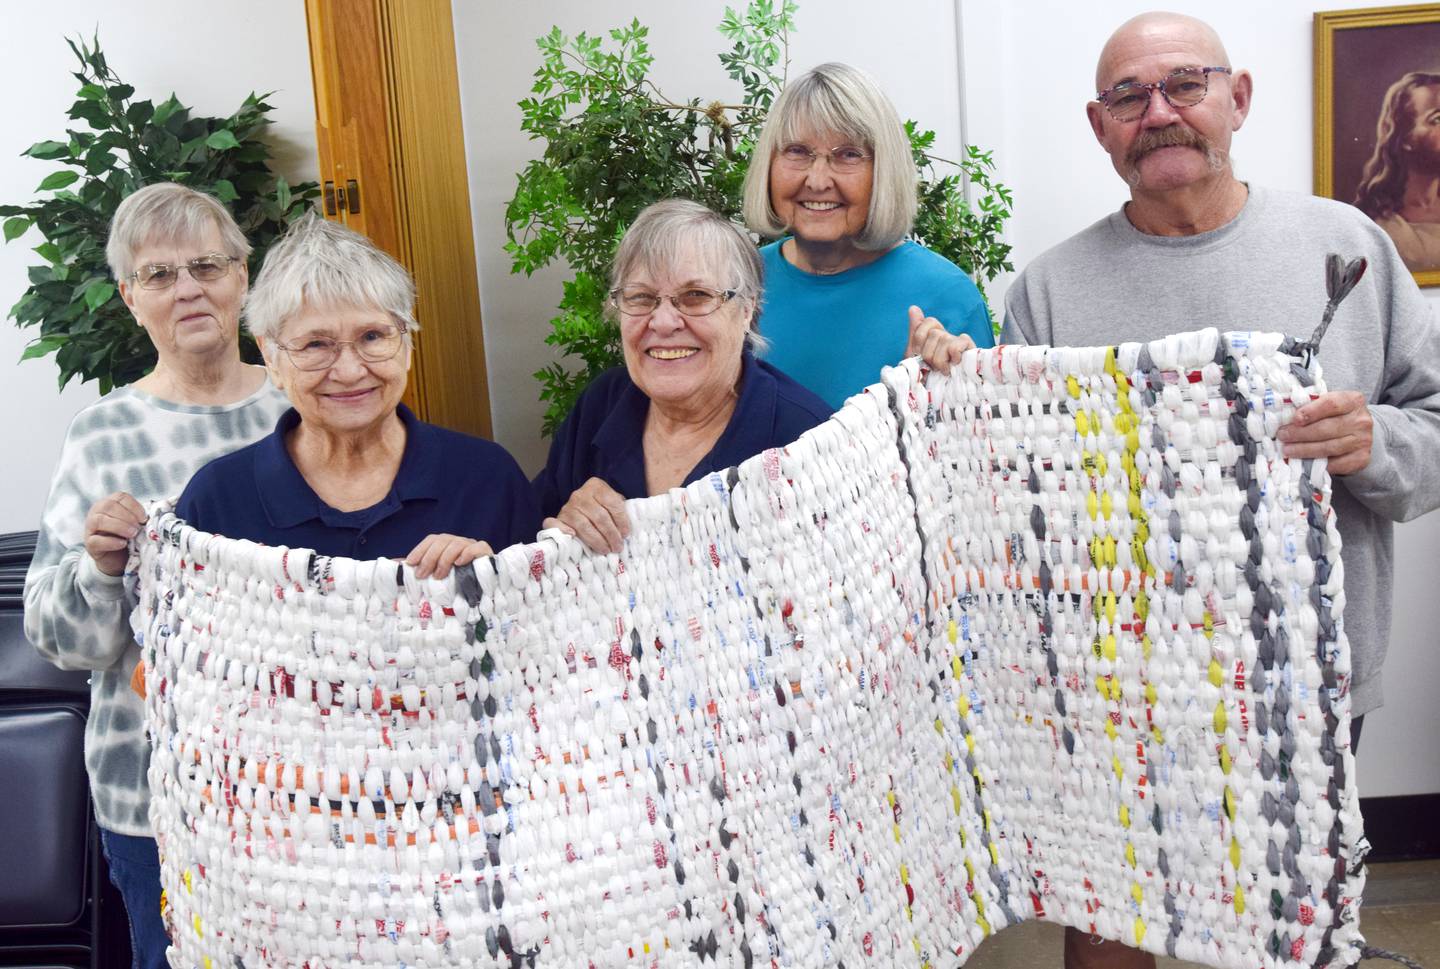 From left: Deb Van Brogen, Jan Lewis, Joyce Stonehocker, Ina Heidemann and Kyle Abel show off a completed sleeping mat made out of plastic grocery bags.